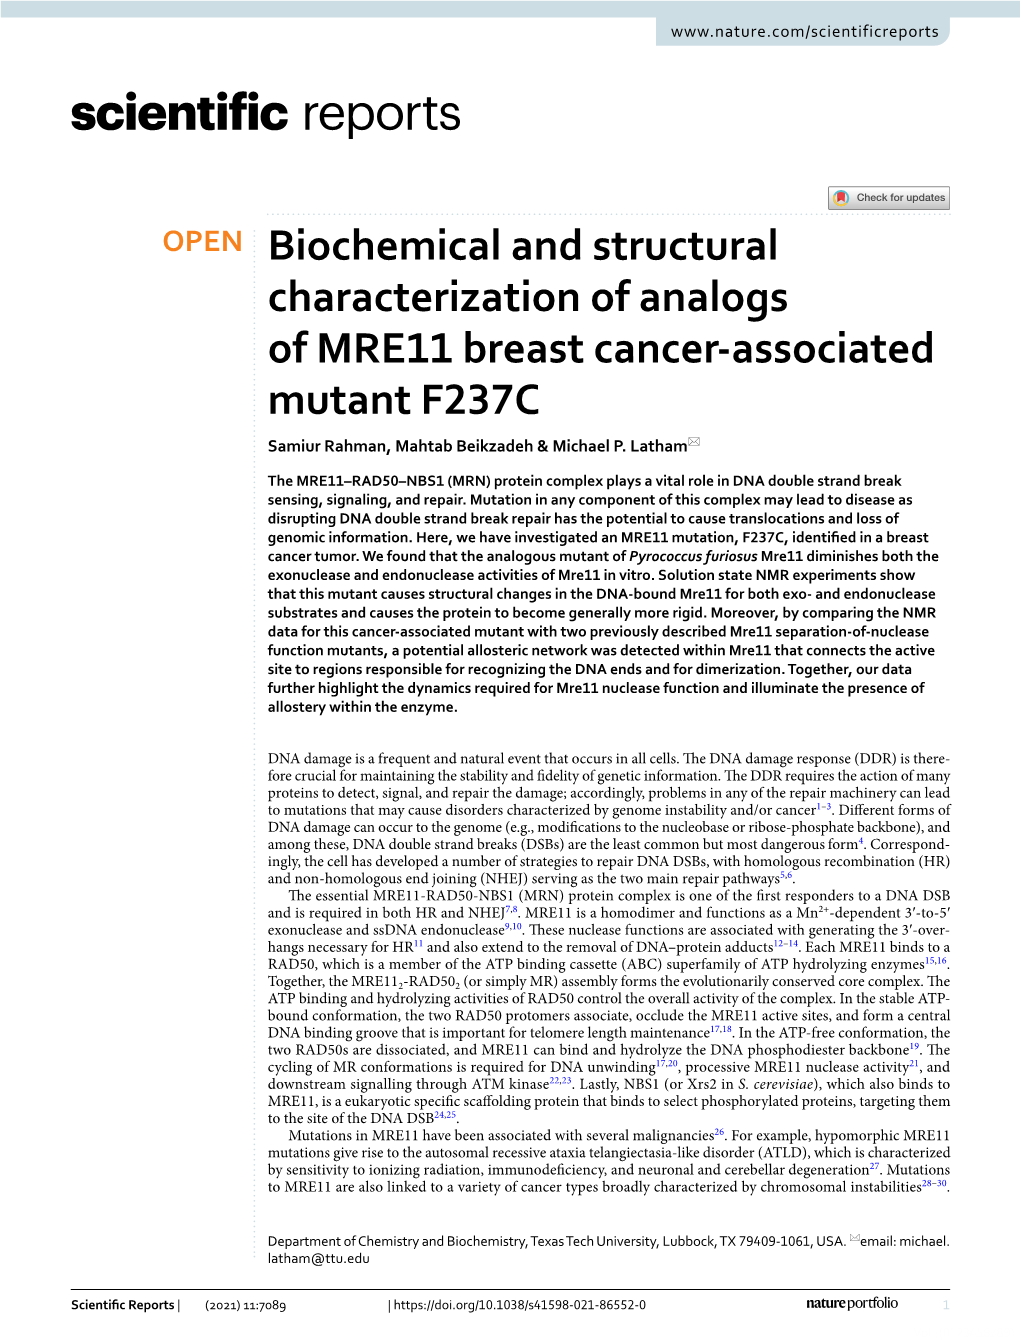 Biochemical and Structural Characterization of Analogs of MRE11 Breast Cancer‑Associated Mutant F237C Samiur Rahman, Mahtab Beikzadeh & Michael P